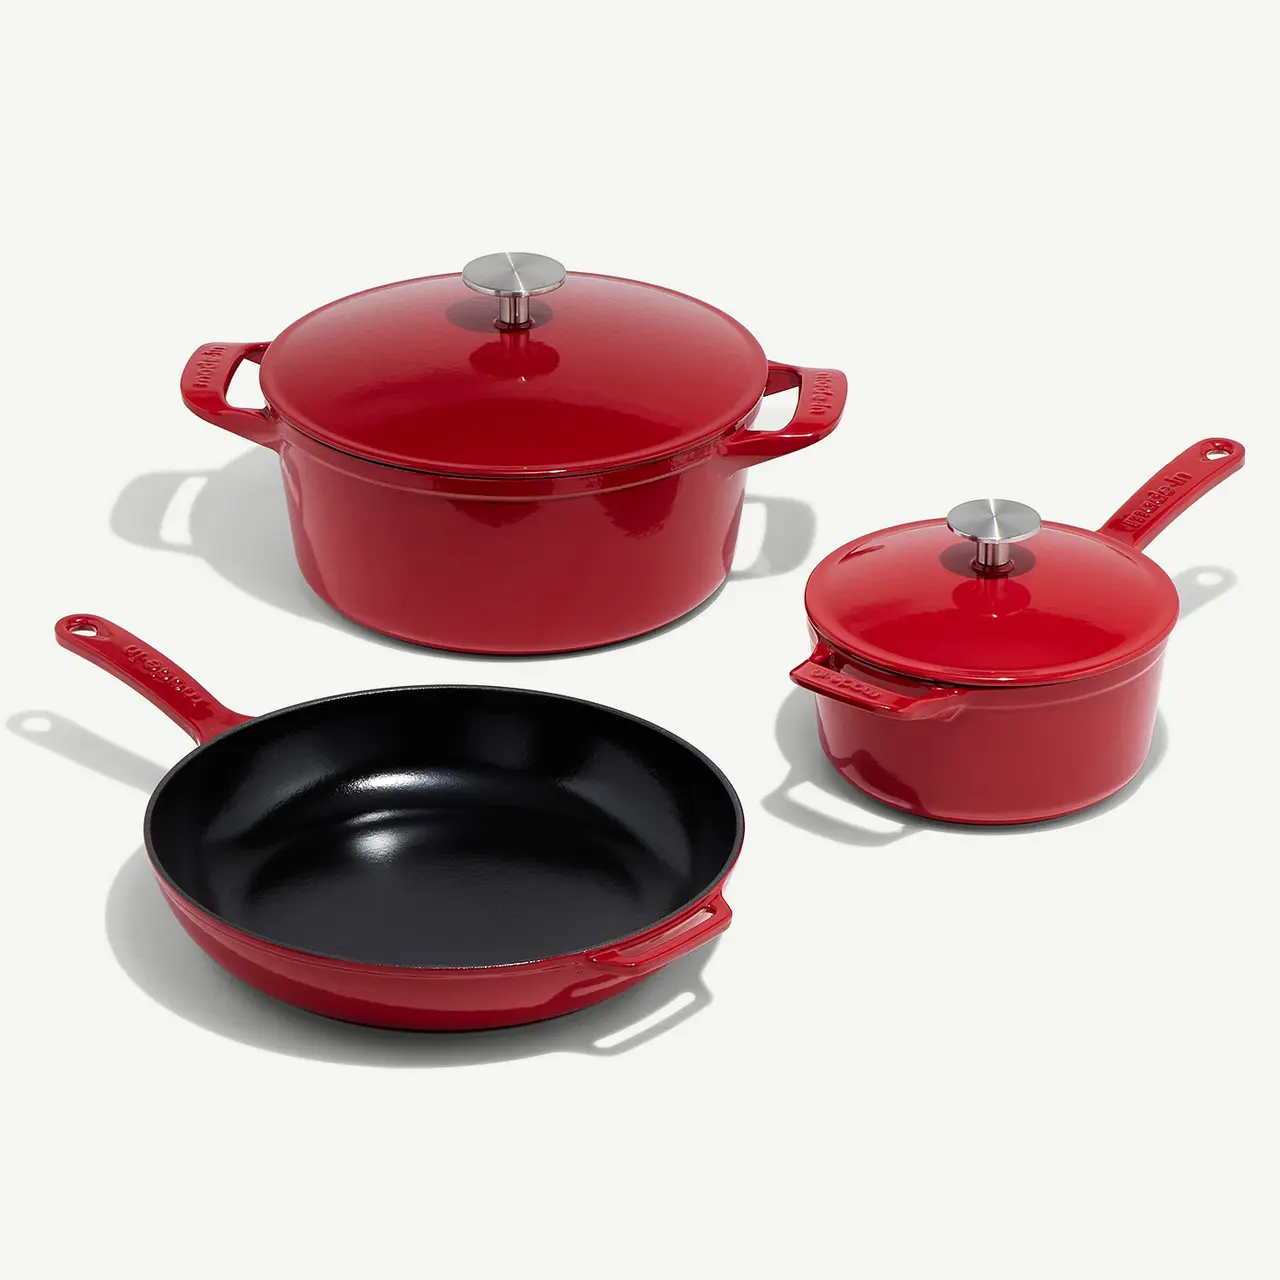 A set of red cookware consisting of a skillet, a saucepan, and a pot with lids, arranged on a light background.